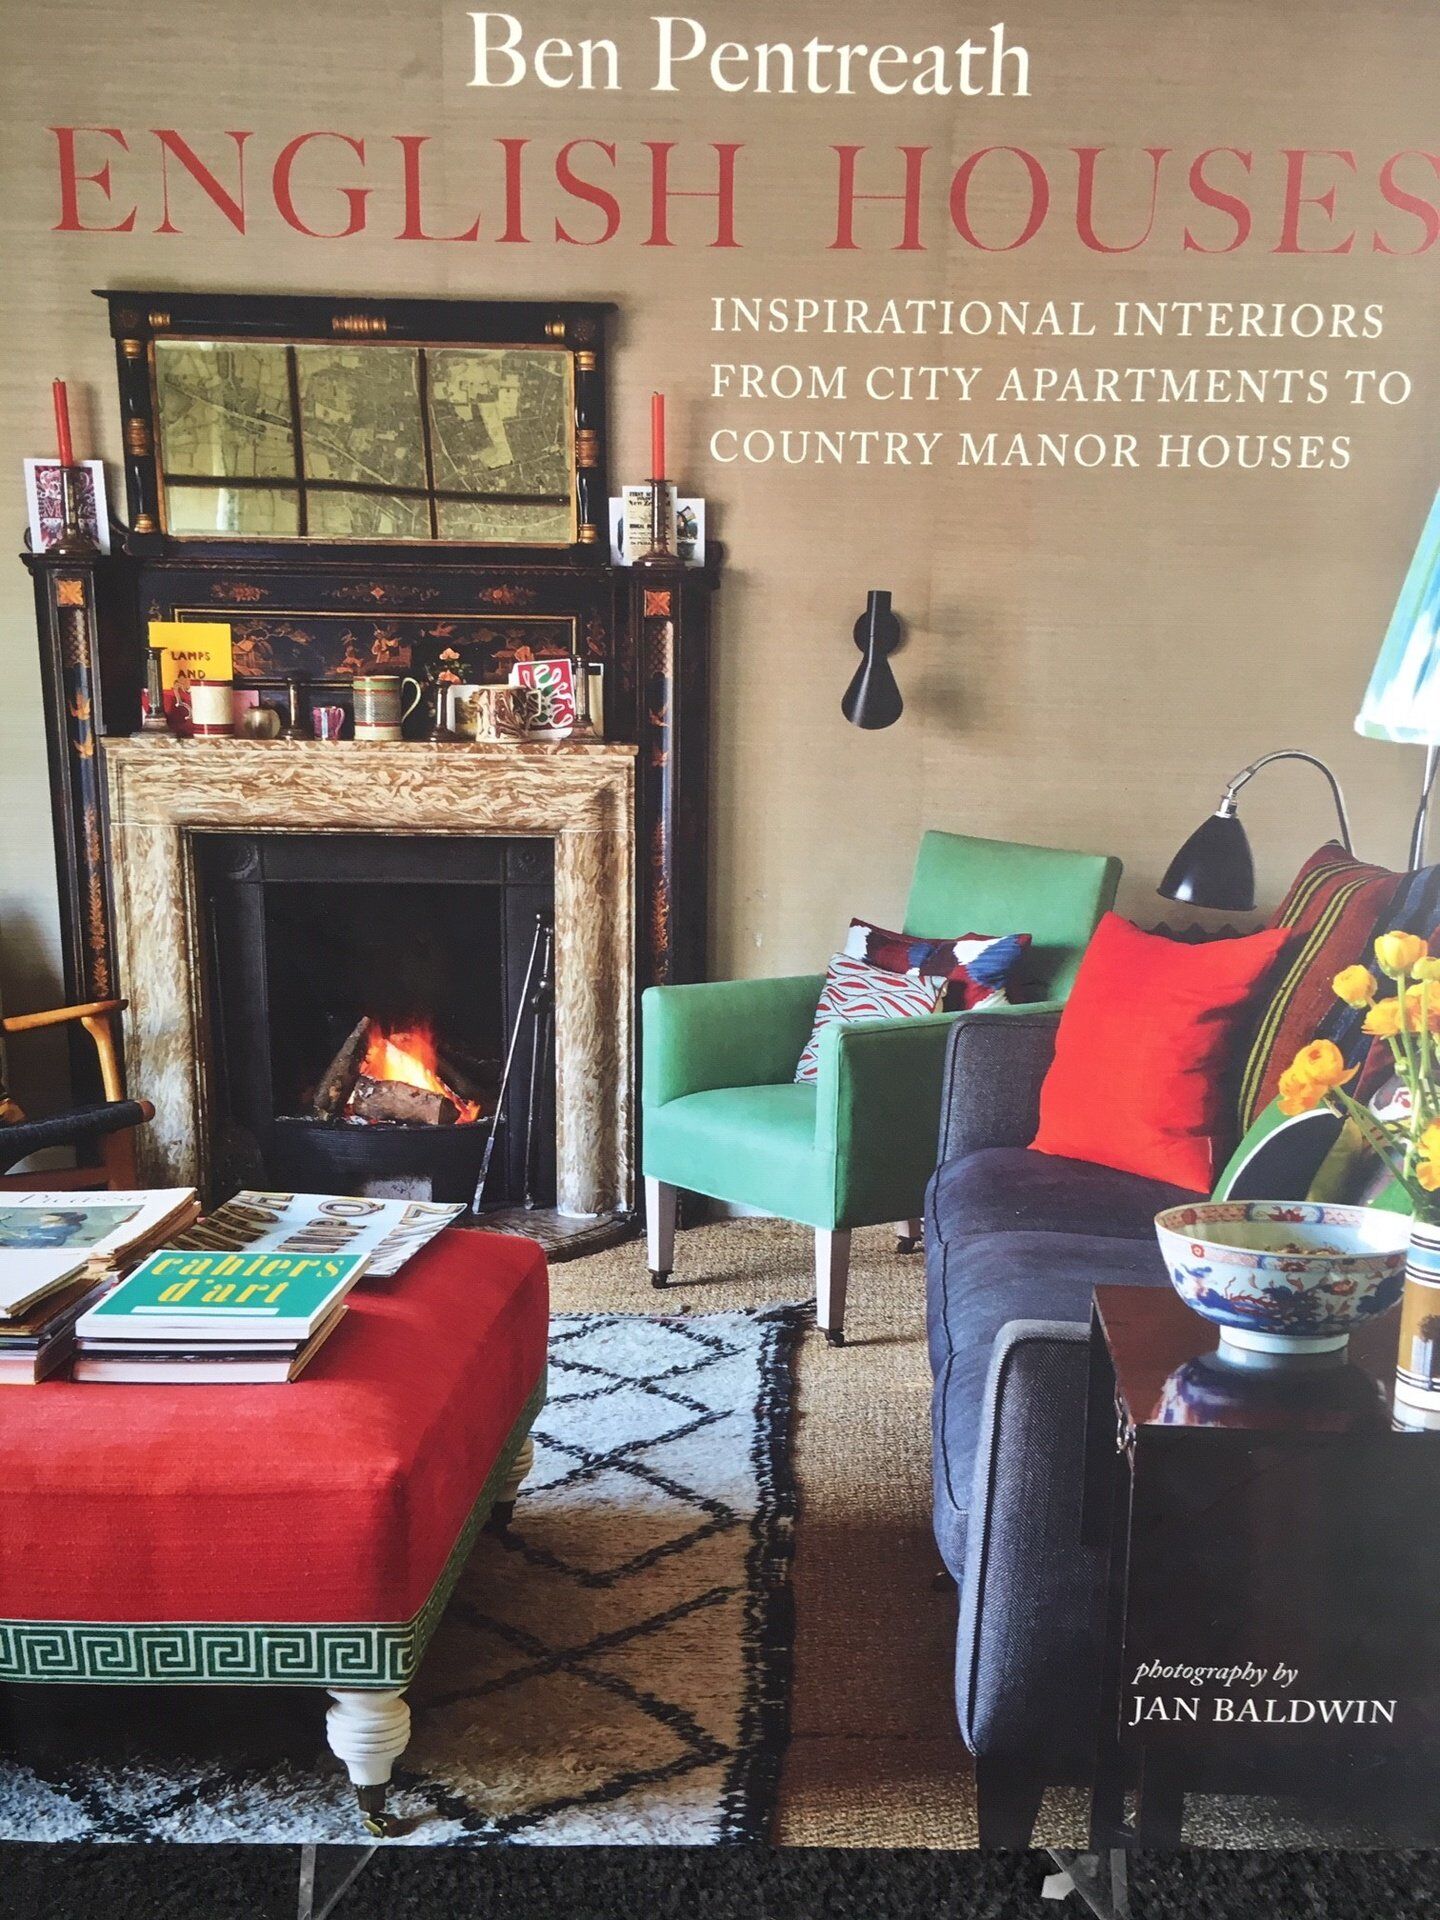 Book: English Houses-Inspirational Interiors from City Apartments to Country Manor Houses